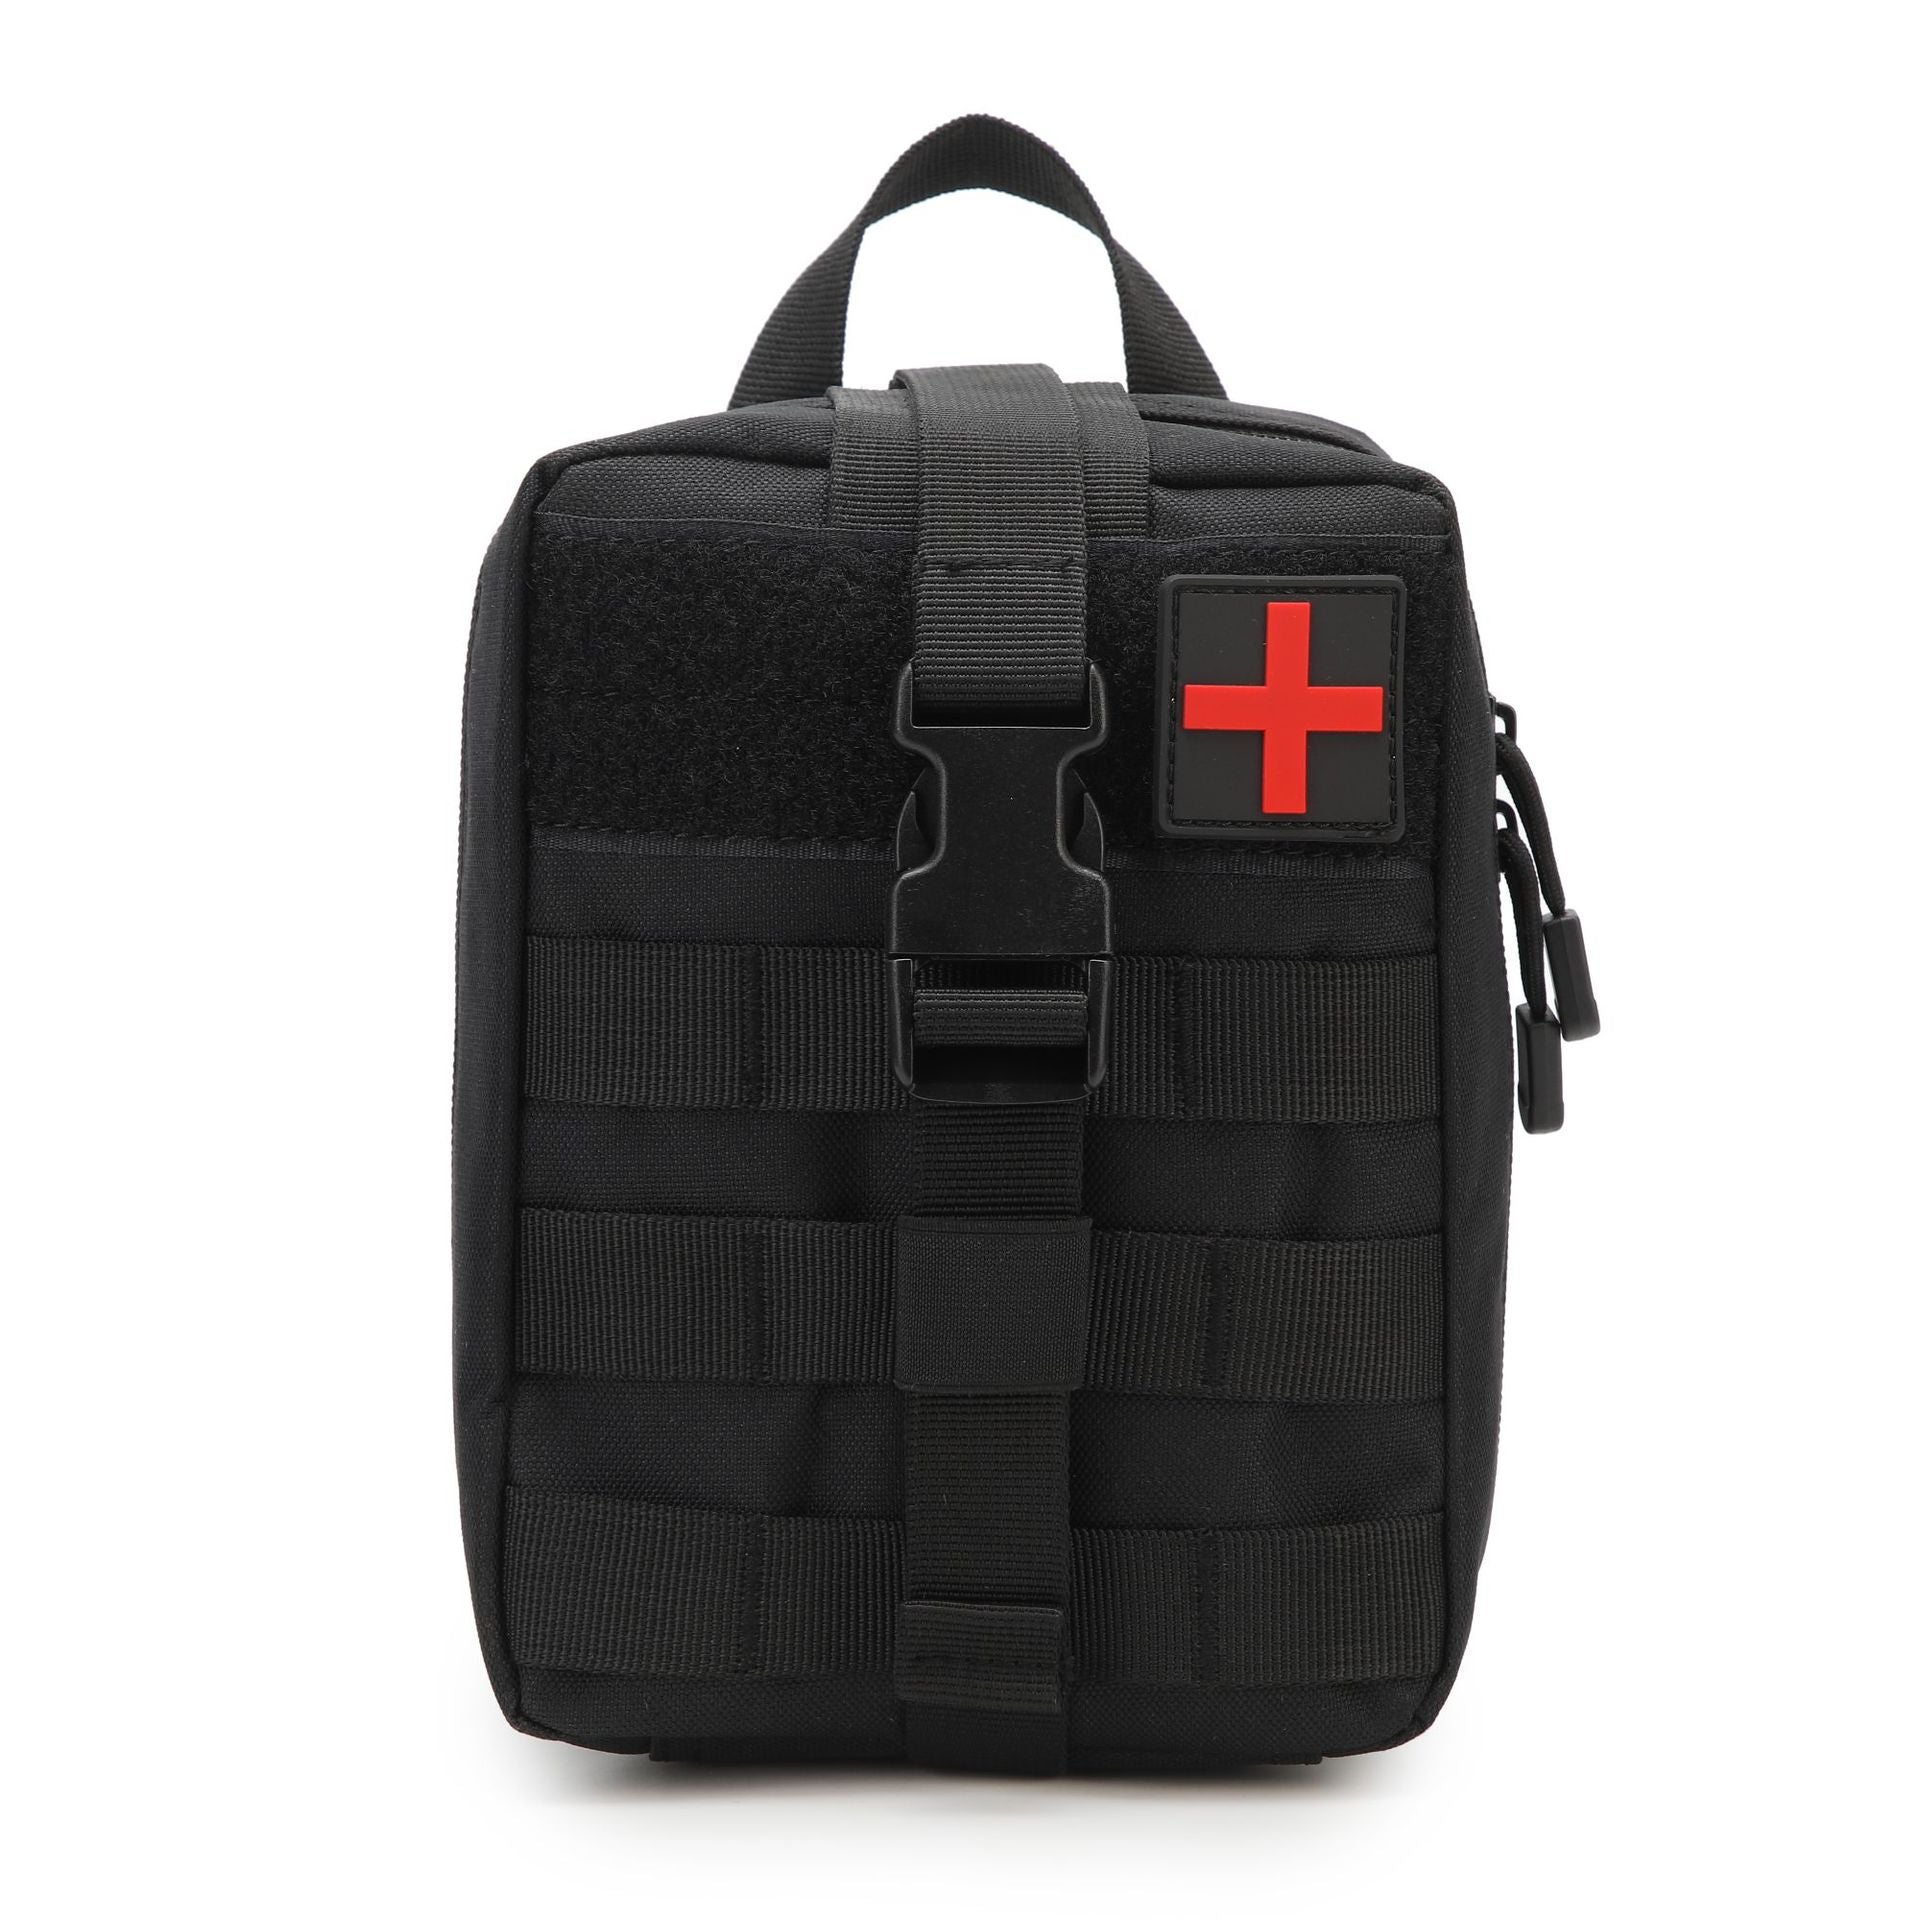 First Aid Kit Emergency Medical Kit - FreeSoldier